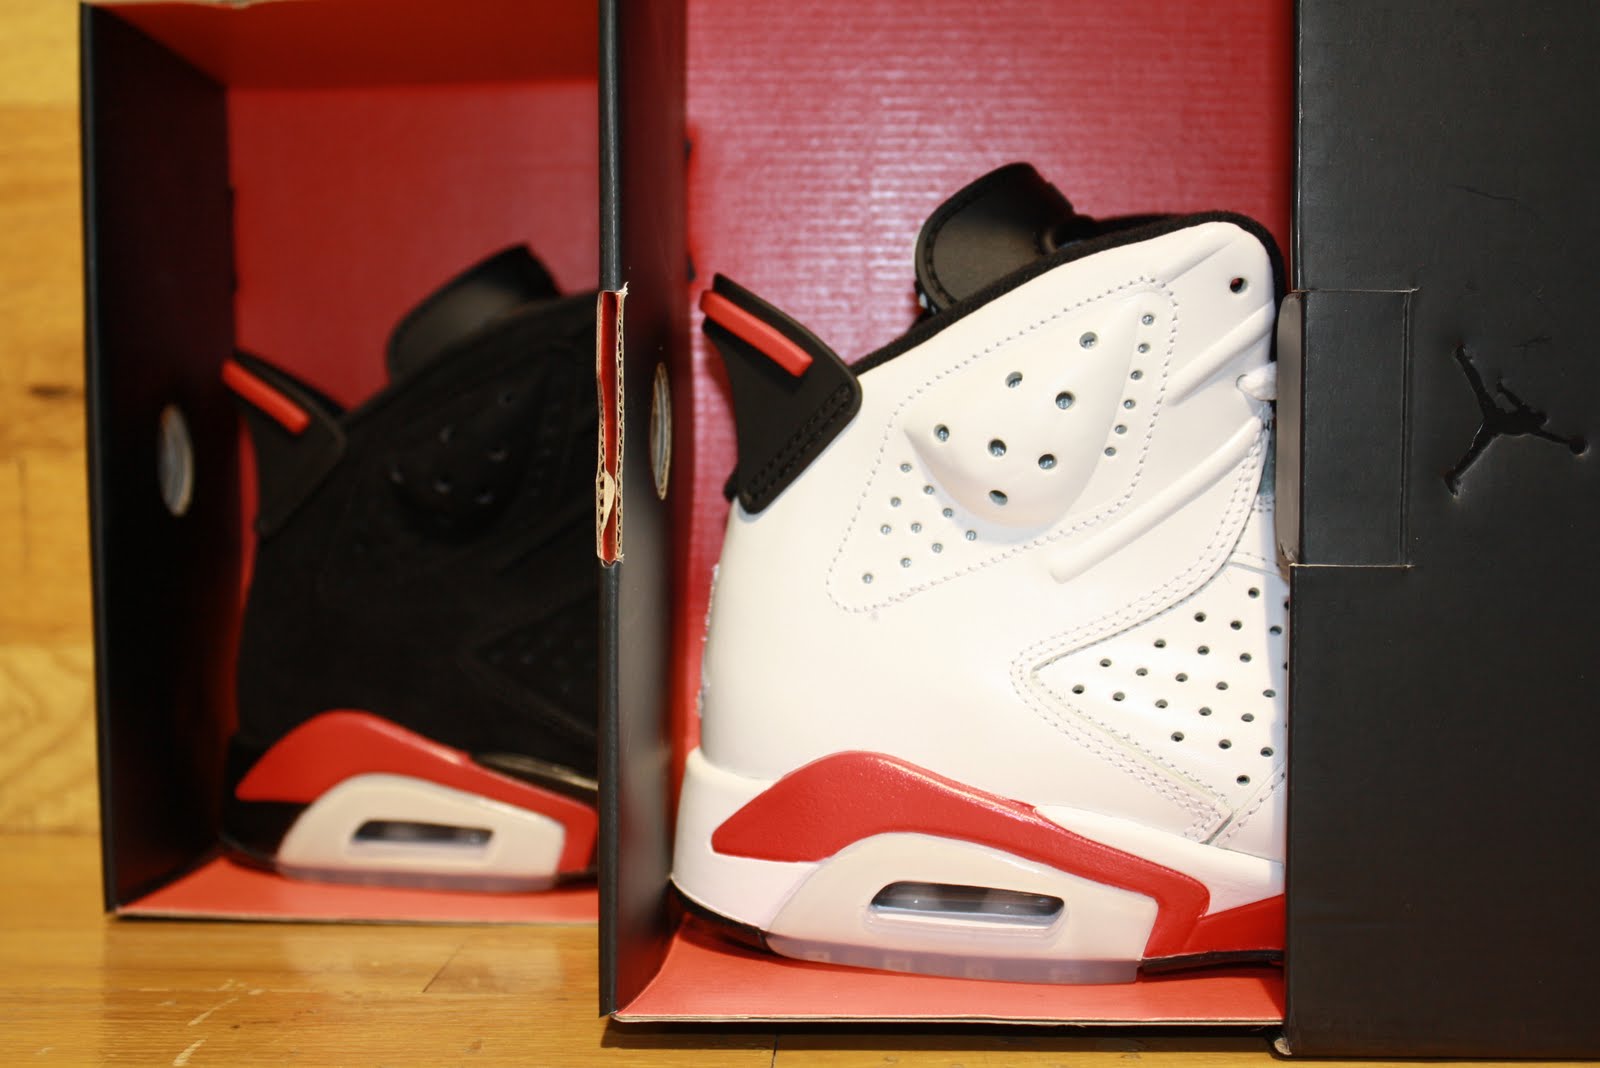 Dr. Jays Stores: New Air Jordan 6 "Infrared" Pack Releasing In Dr Jays